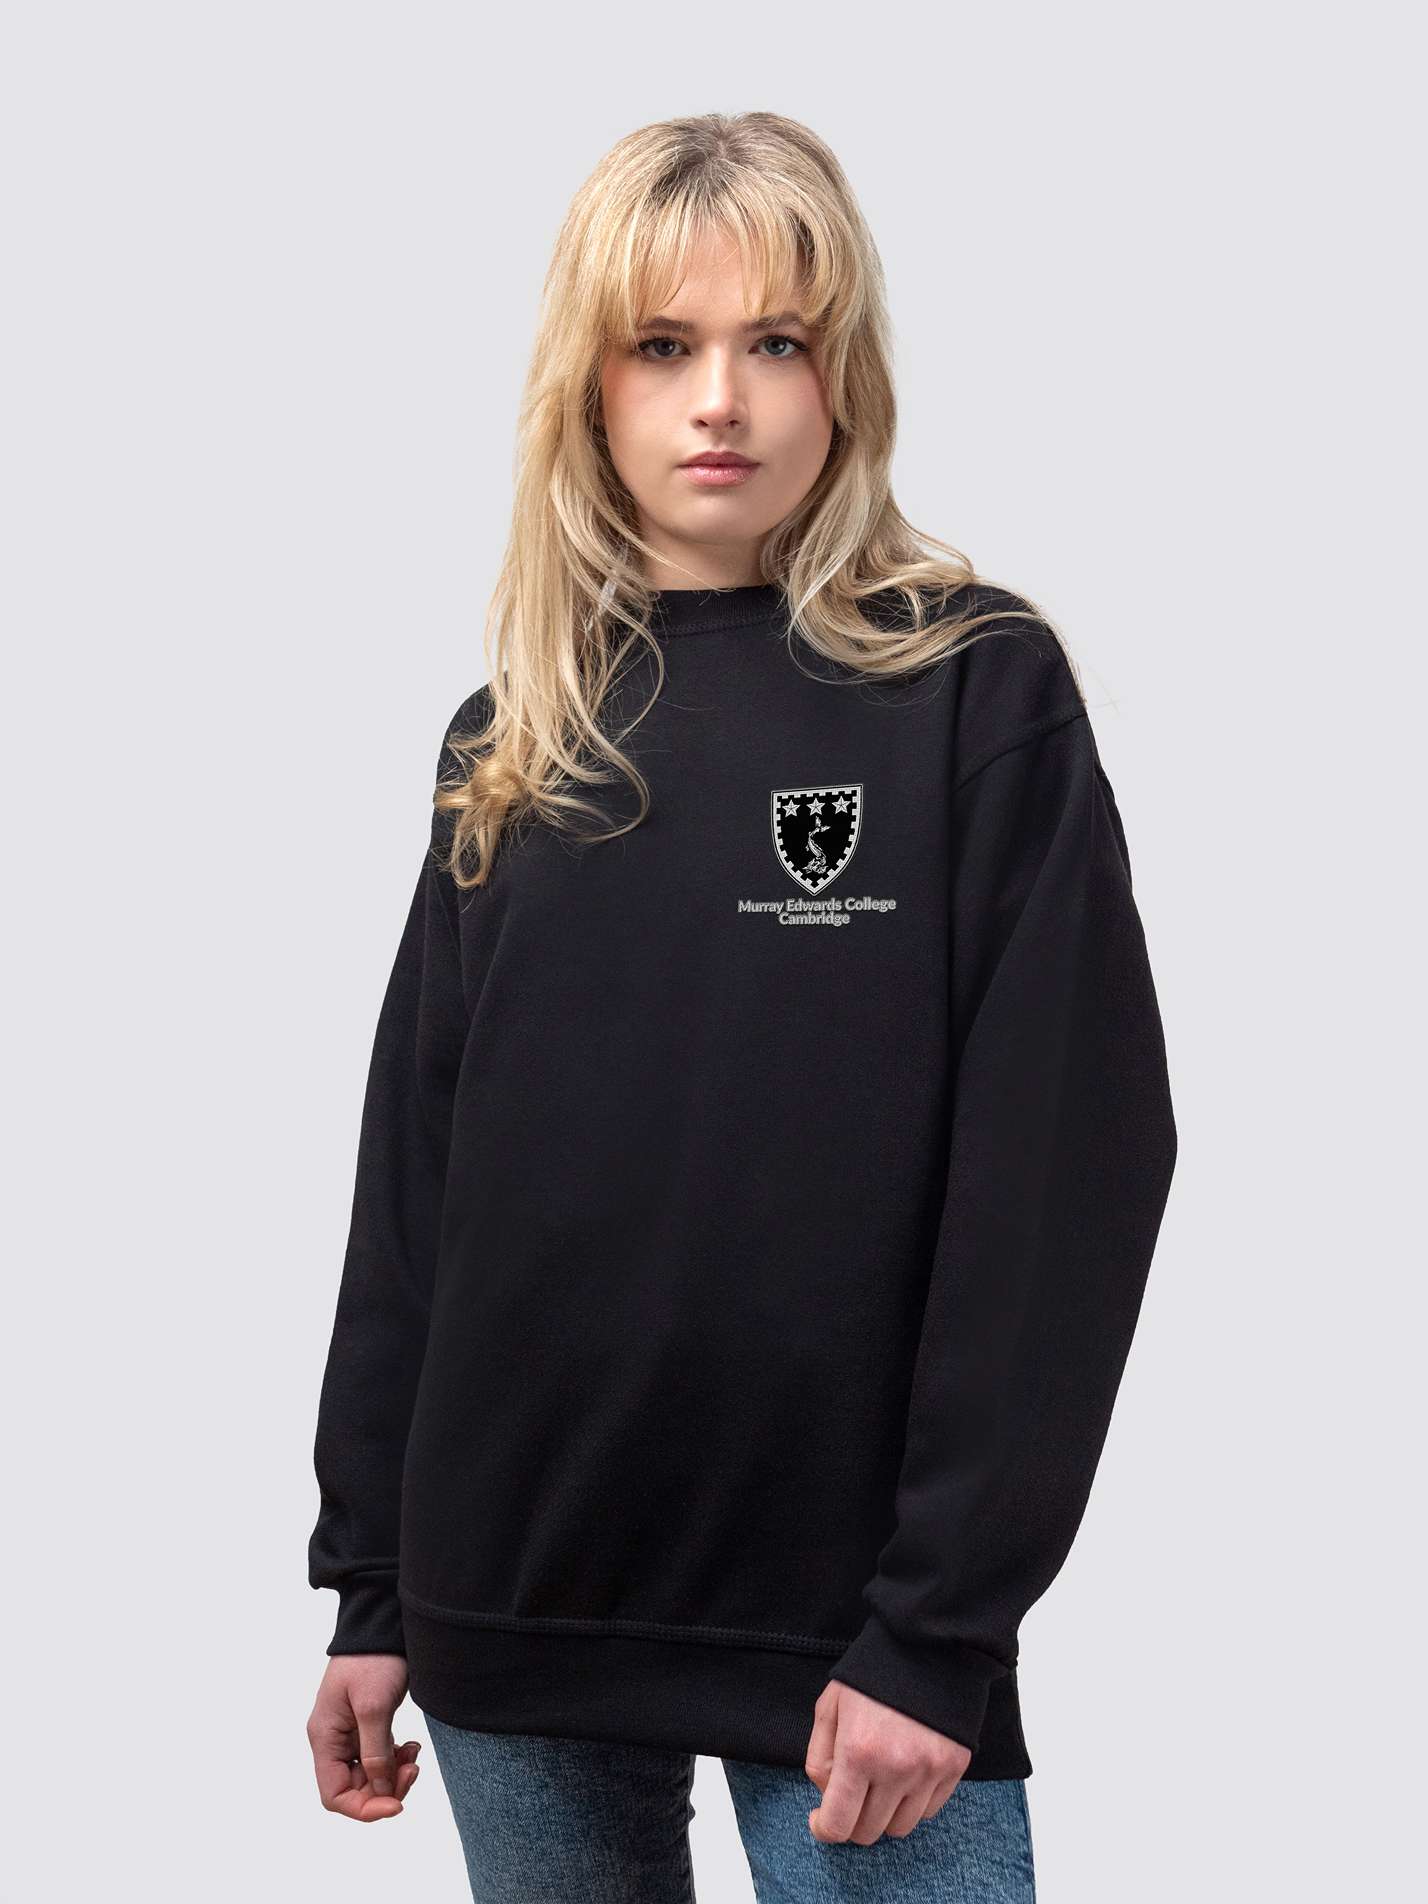 Murray Edwards crest on the front of a black, crew-neck sweatshirt